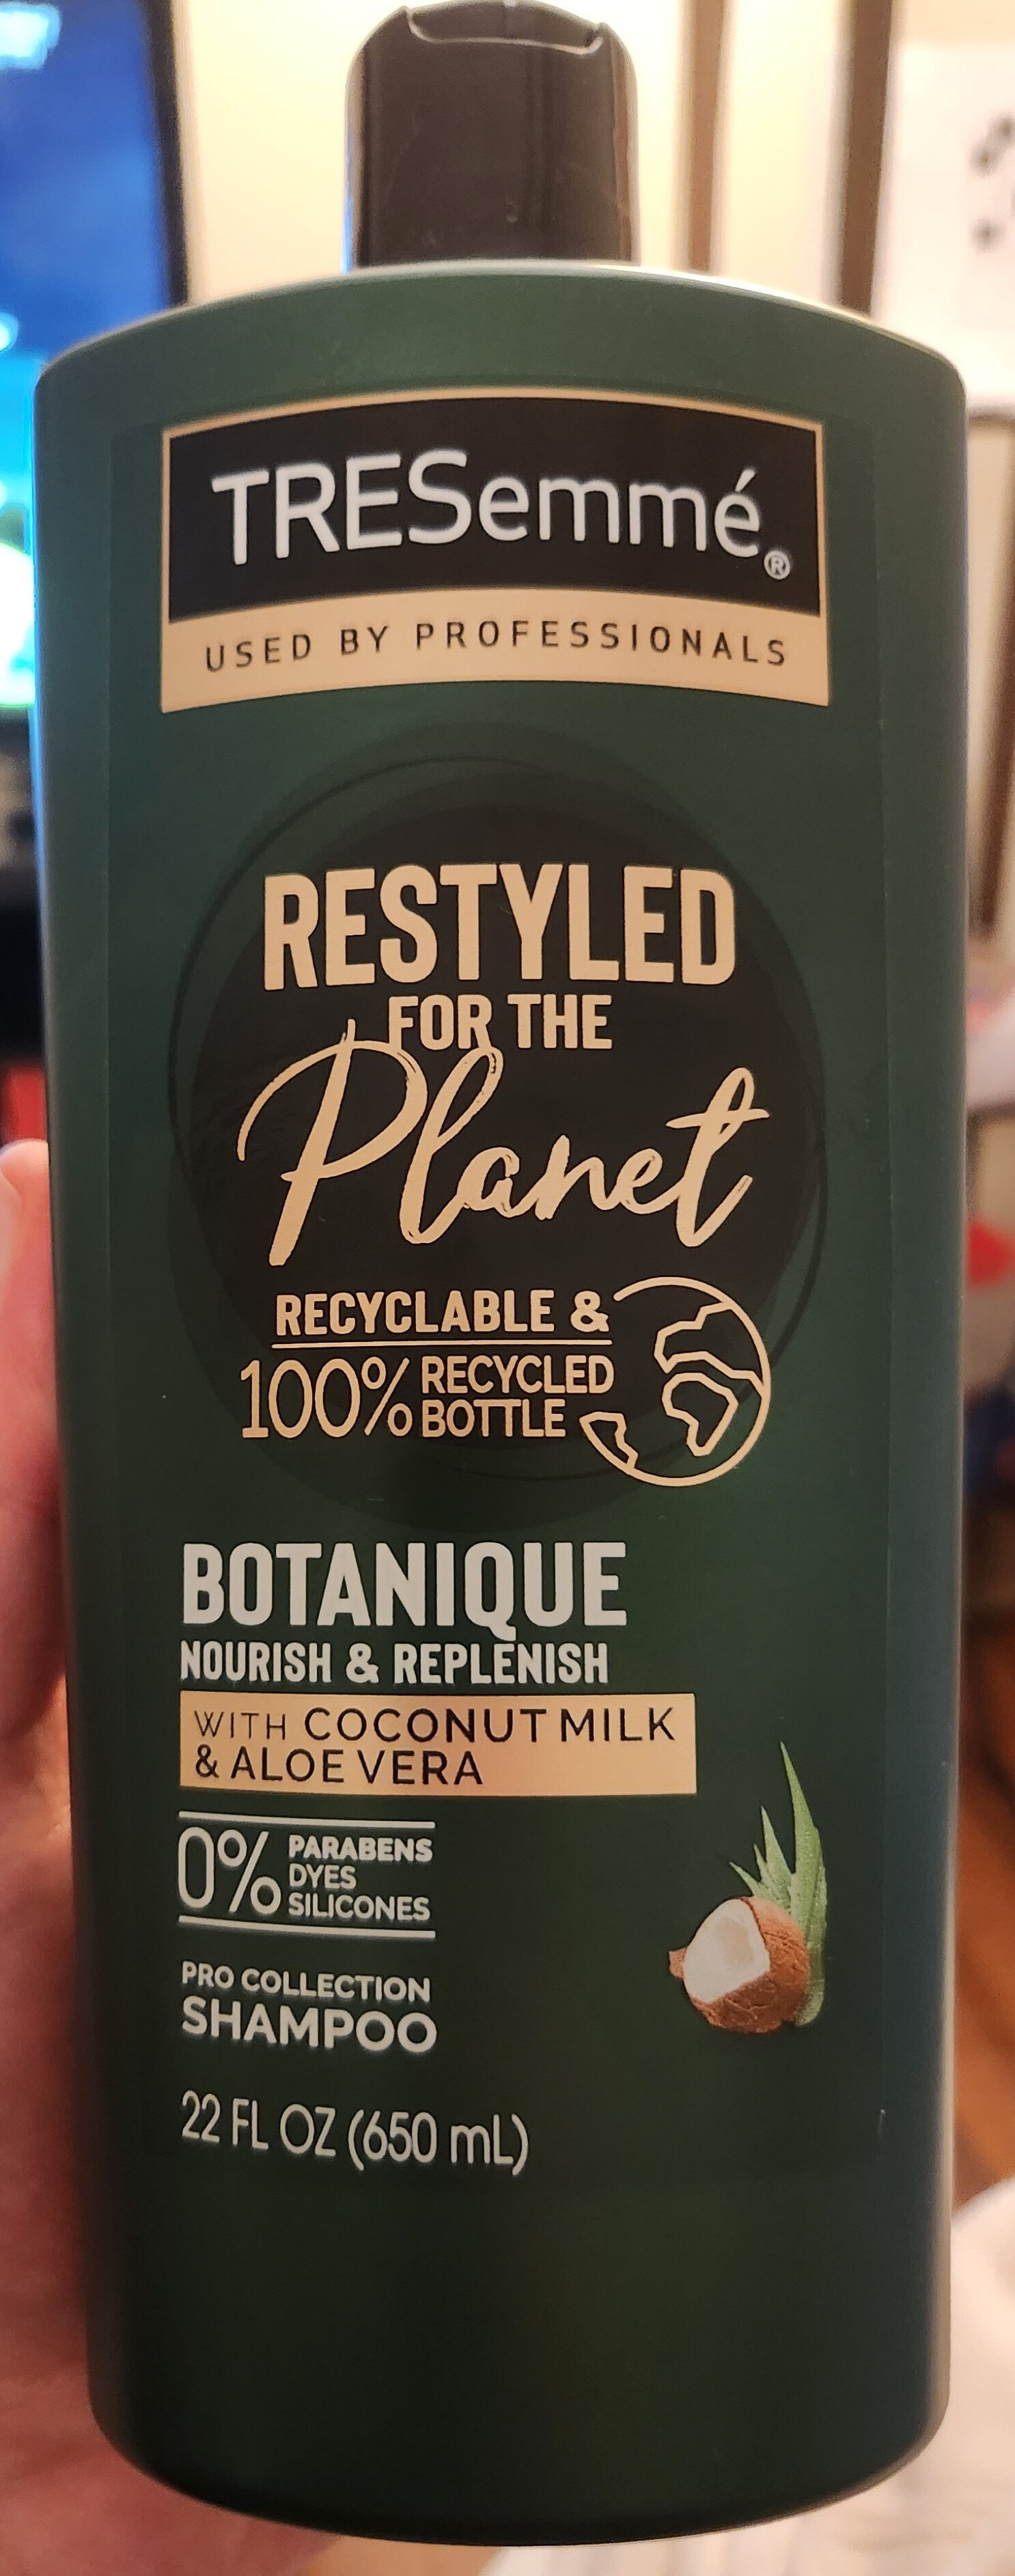 'Restyled for the Planet' Botanique Shampoo with Coconut Milk & Aloe Vera - Tuote - en